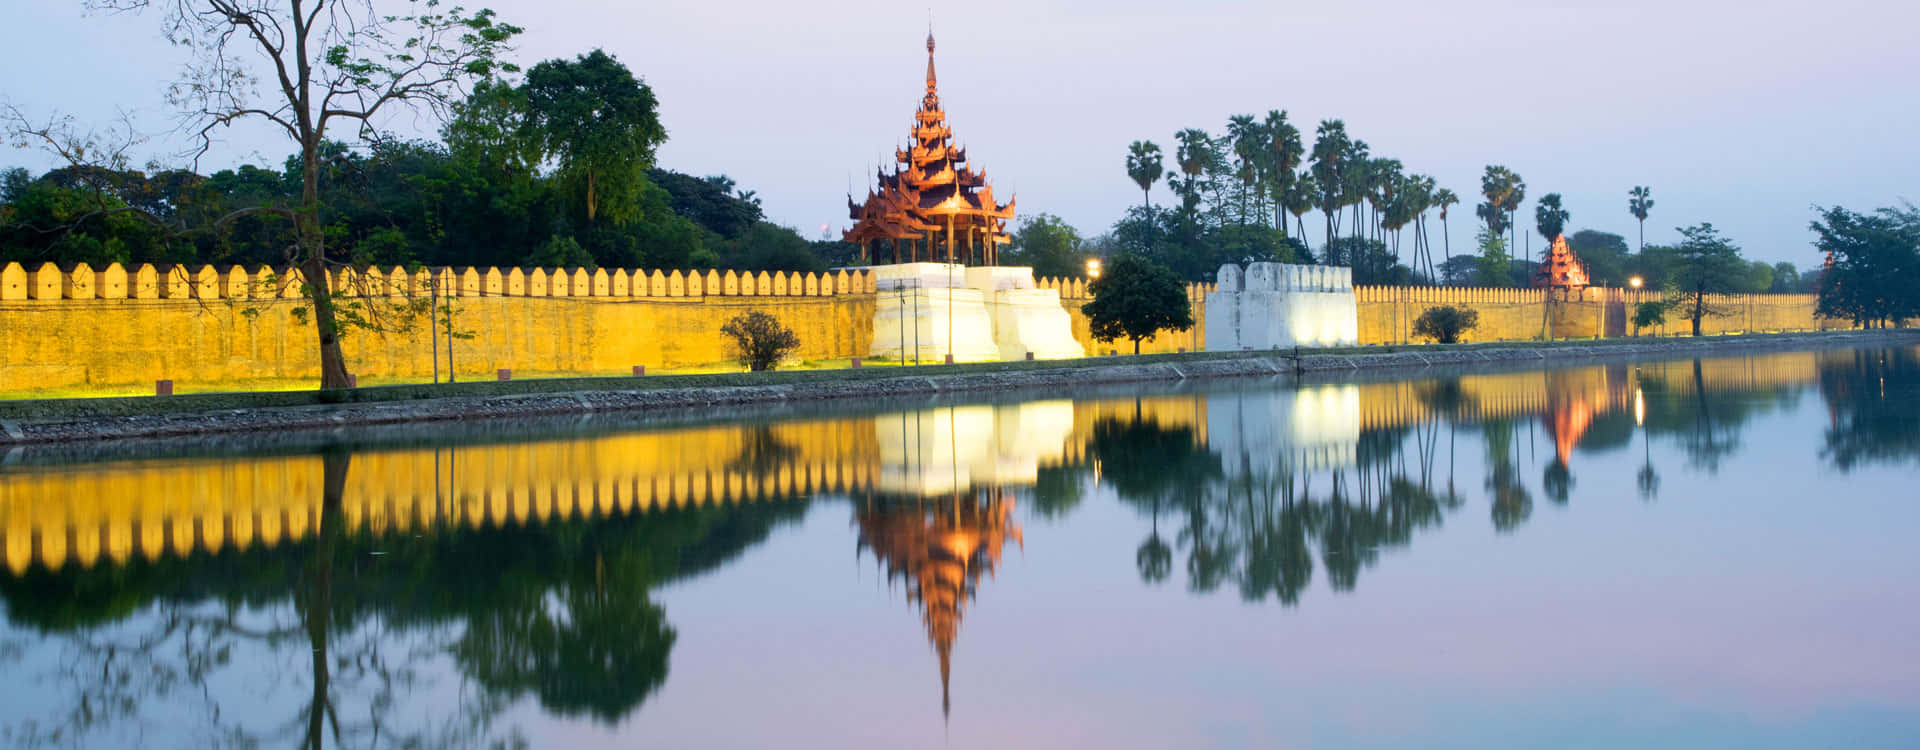 The Golden Mandalay Palace Walls In An Evening Scene Wallpaper